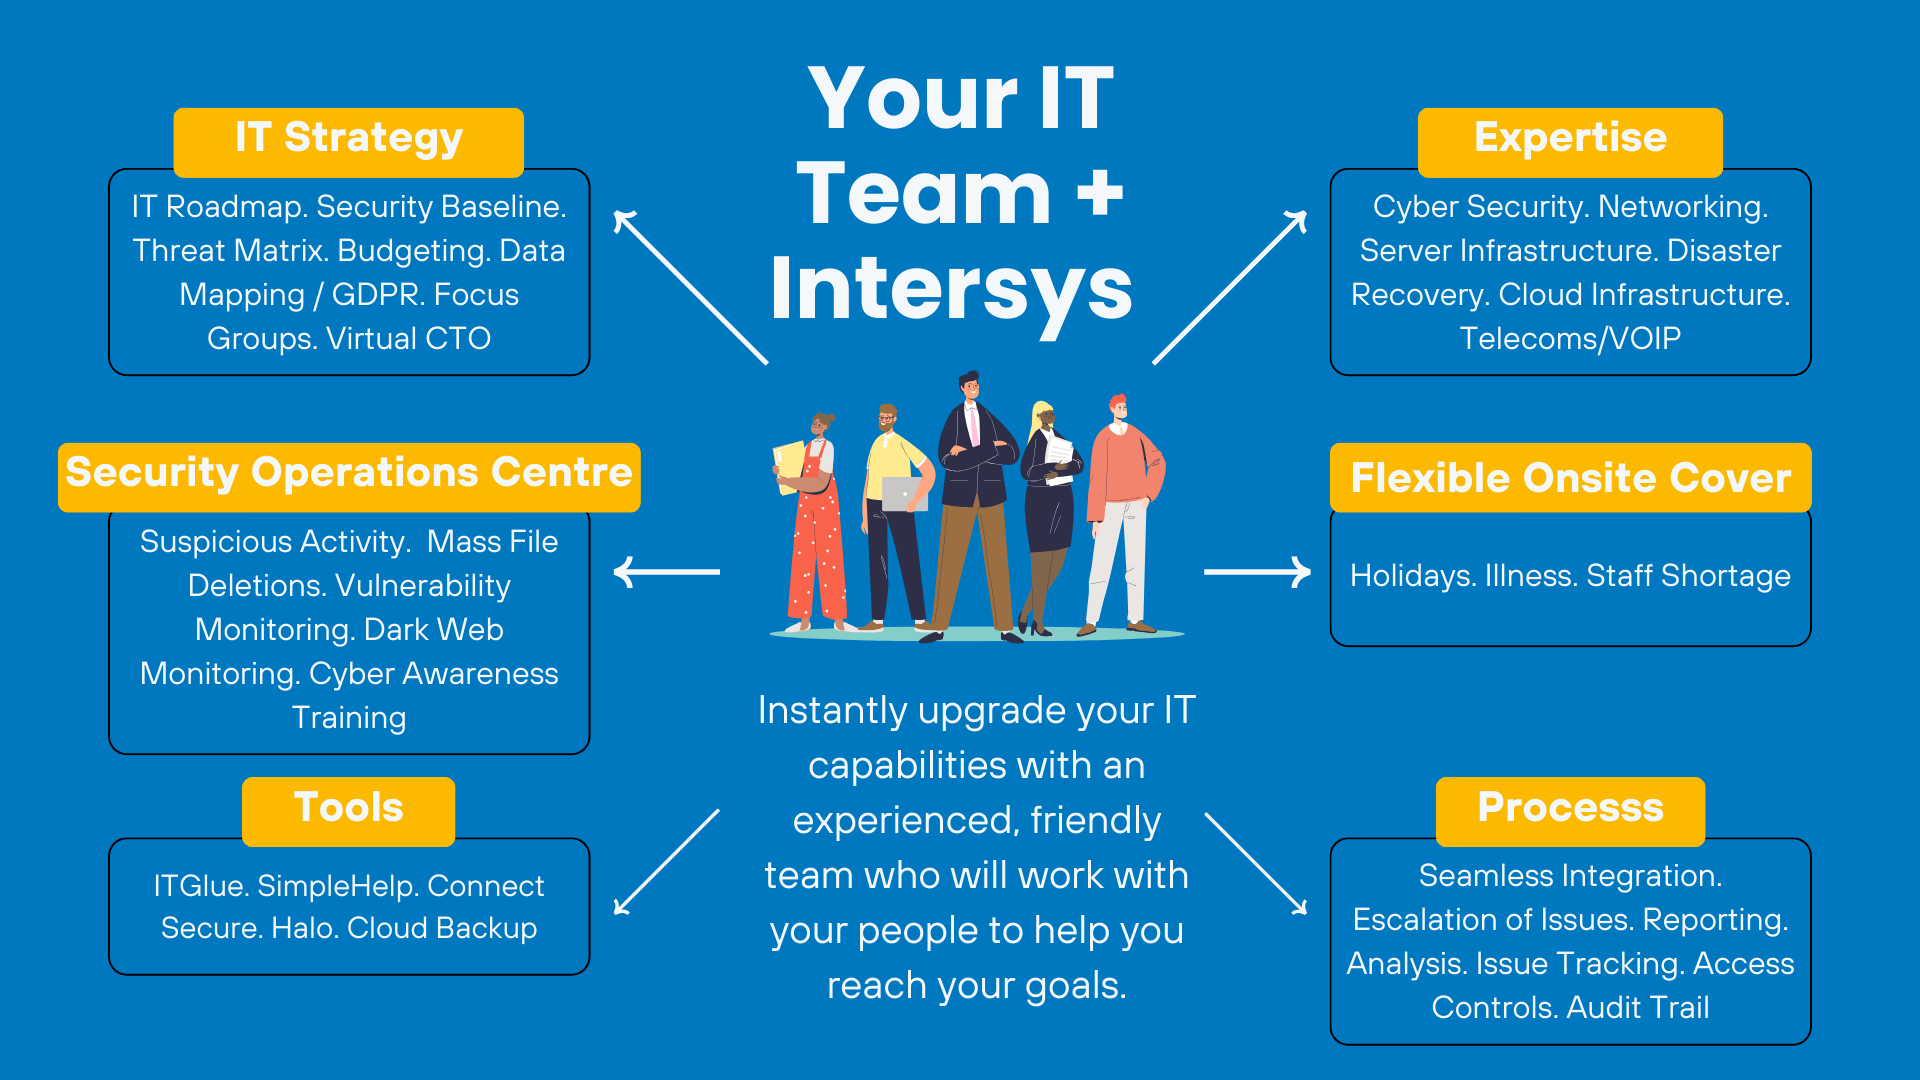 Your IT Team + Intersys